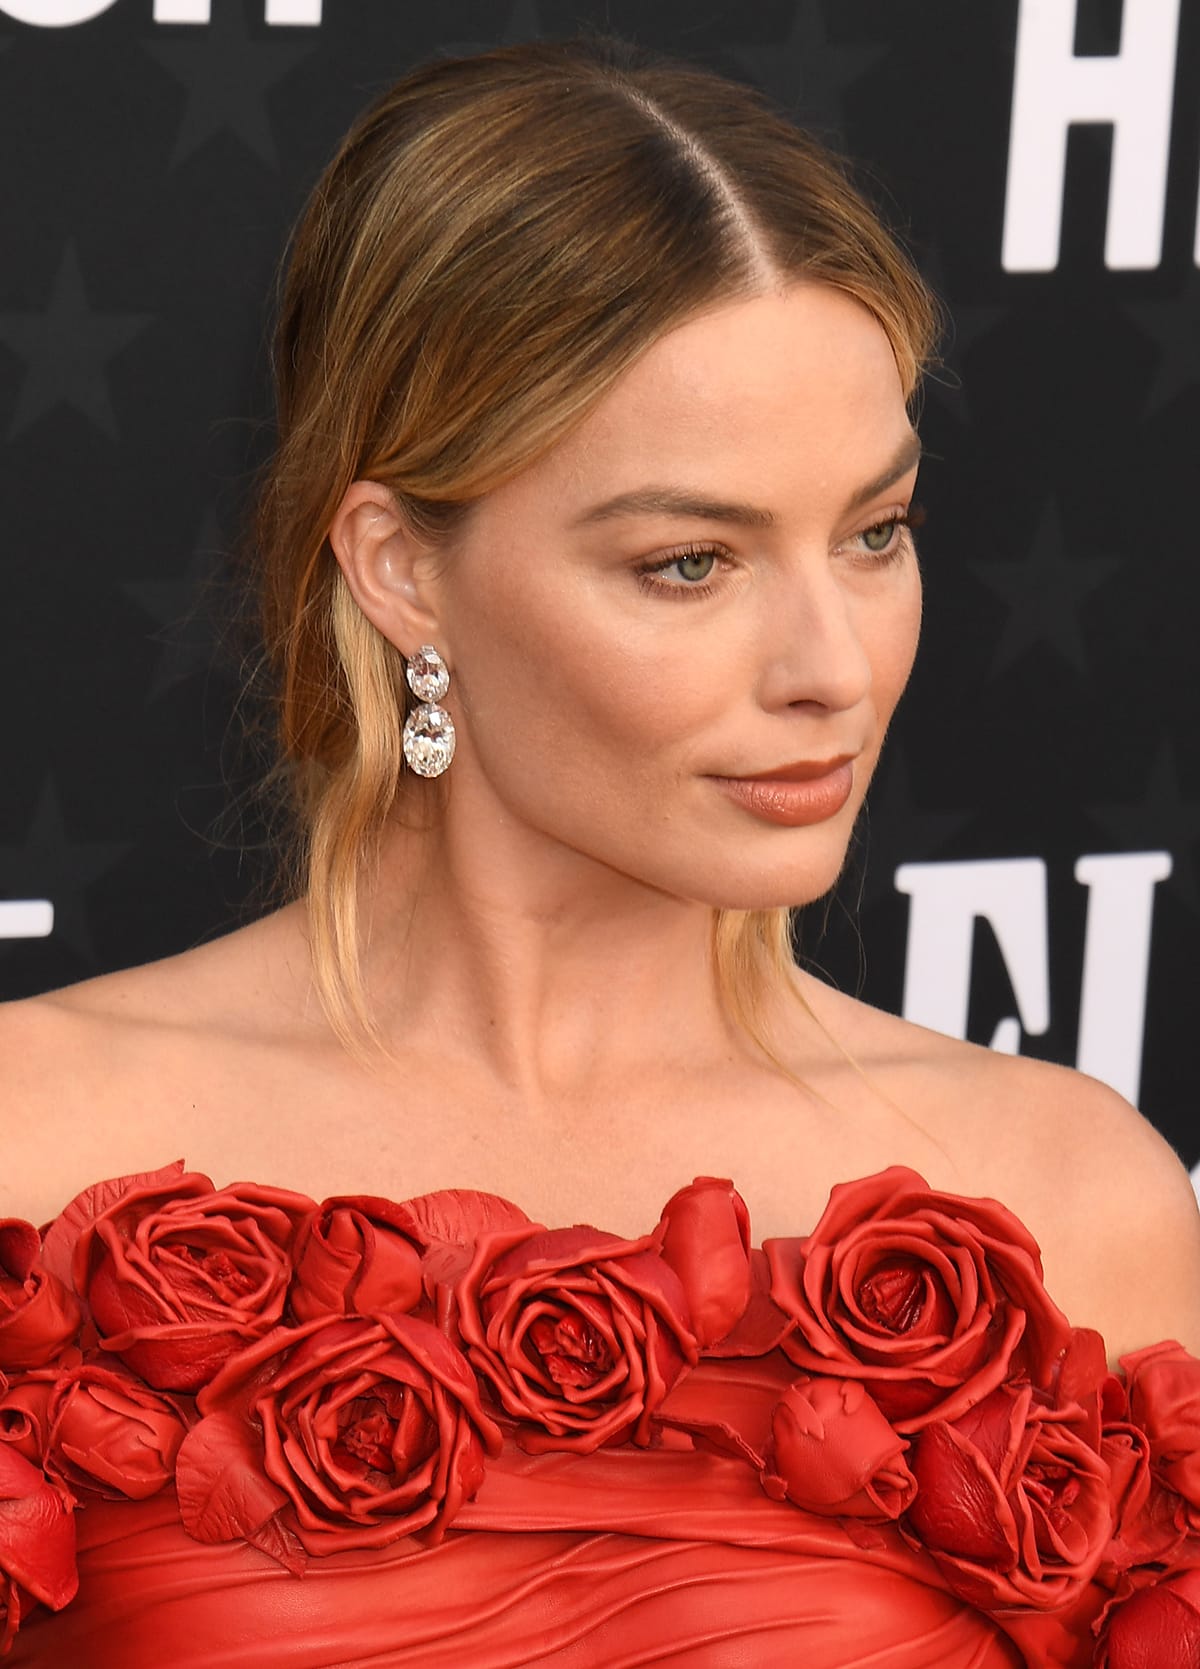 Margot Robbie wears her tresses in a loose low bun and highlights her natural beauty with minimal makeup that includes mascara, subtle blush, and red-brown lipstick